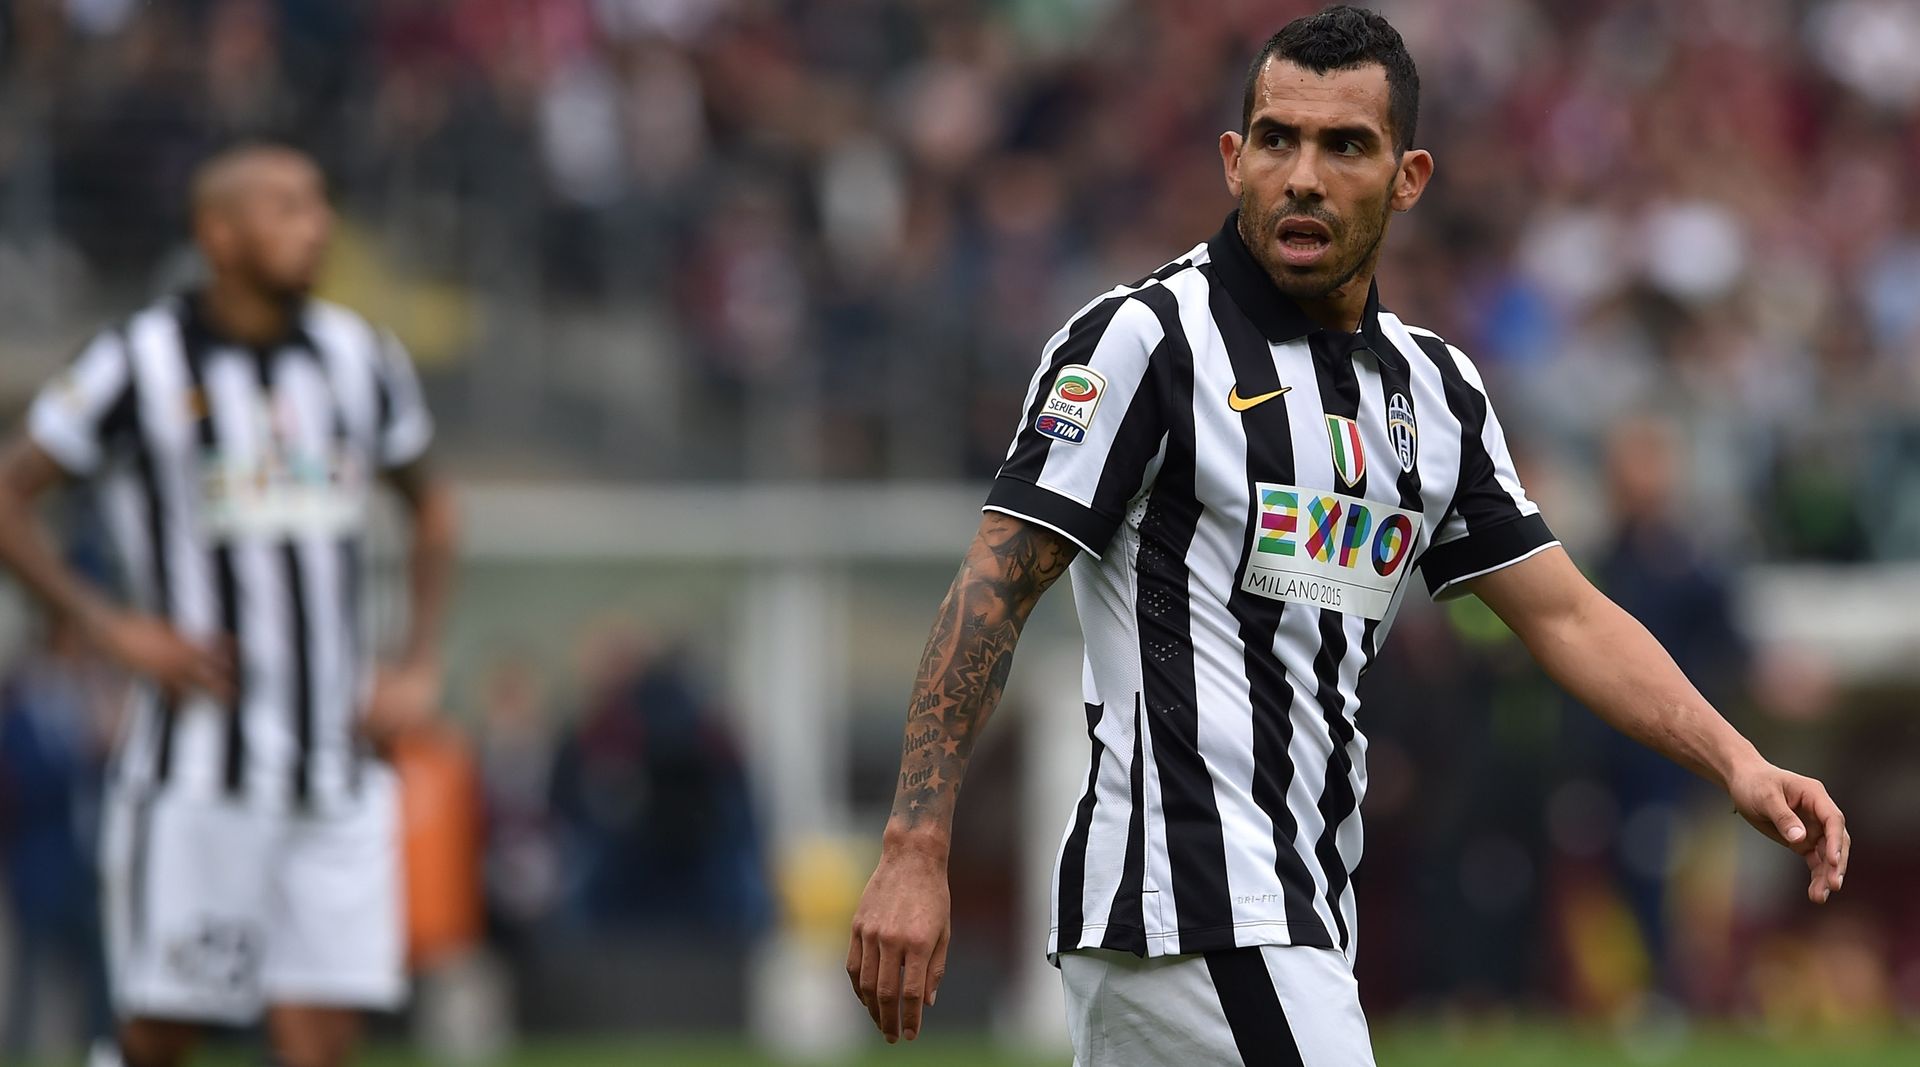 <p>                     Another superstar forward who had a standout two-year stay in Serie A during the 10s, Carlos Tevez was instrumental in Juventus back-to-back title triumphs of 2013/14 and 2014/15.                   </p>                                      <p>                     The tenacious Argentine made the Serie A Team of the Year in both campaigns and was recognised as the division’s best player in the latter.                   </p>